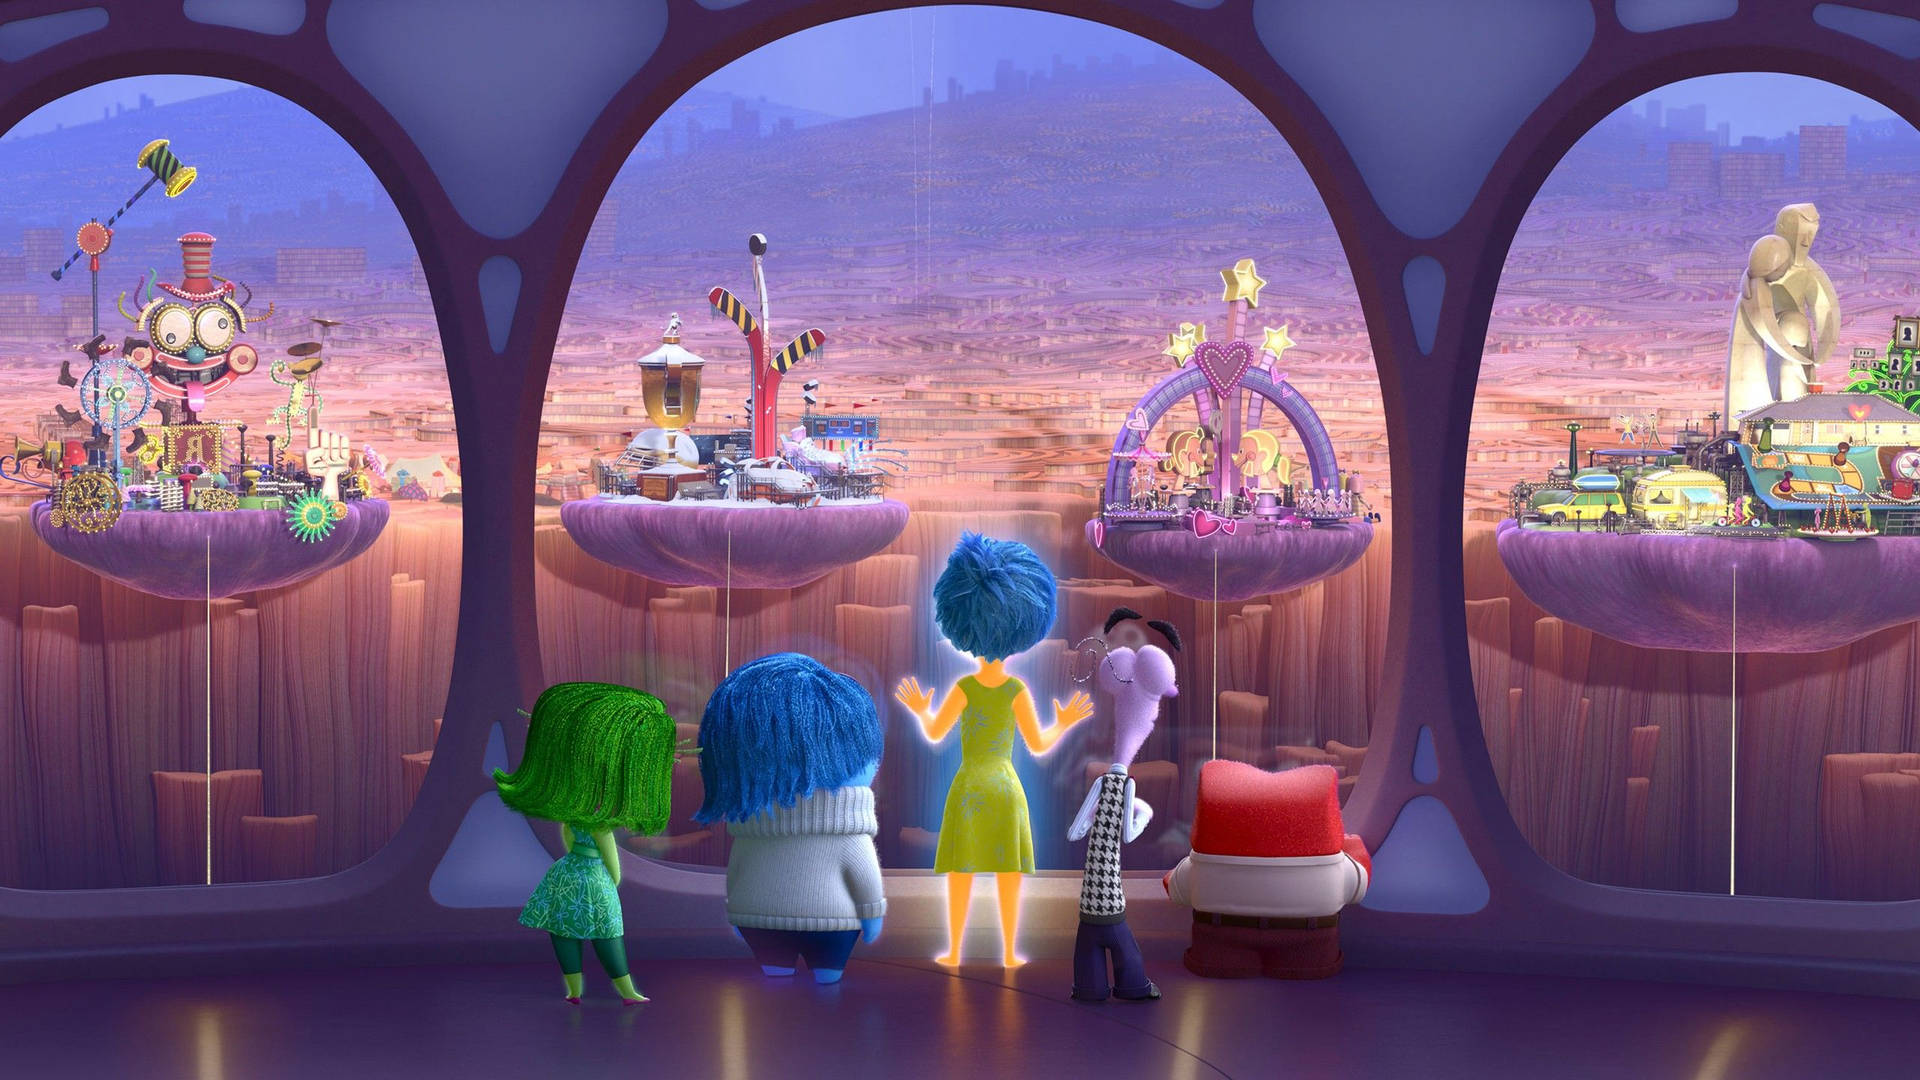 Five interconnected Personality Islands in the world of Inside Out Wallpaper